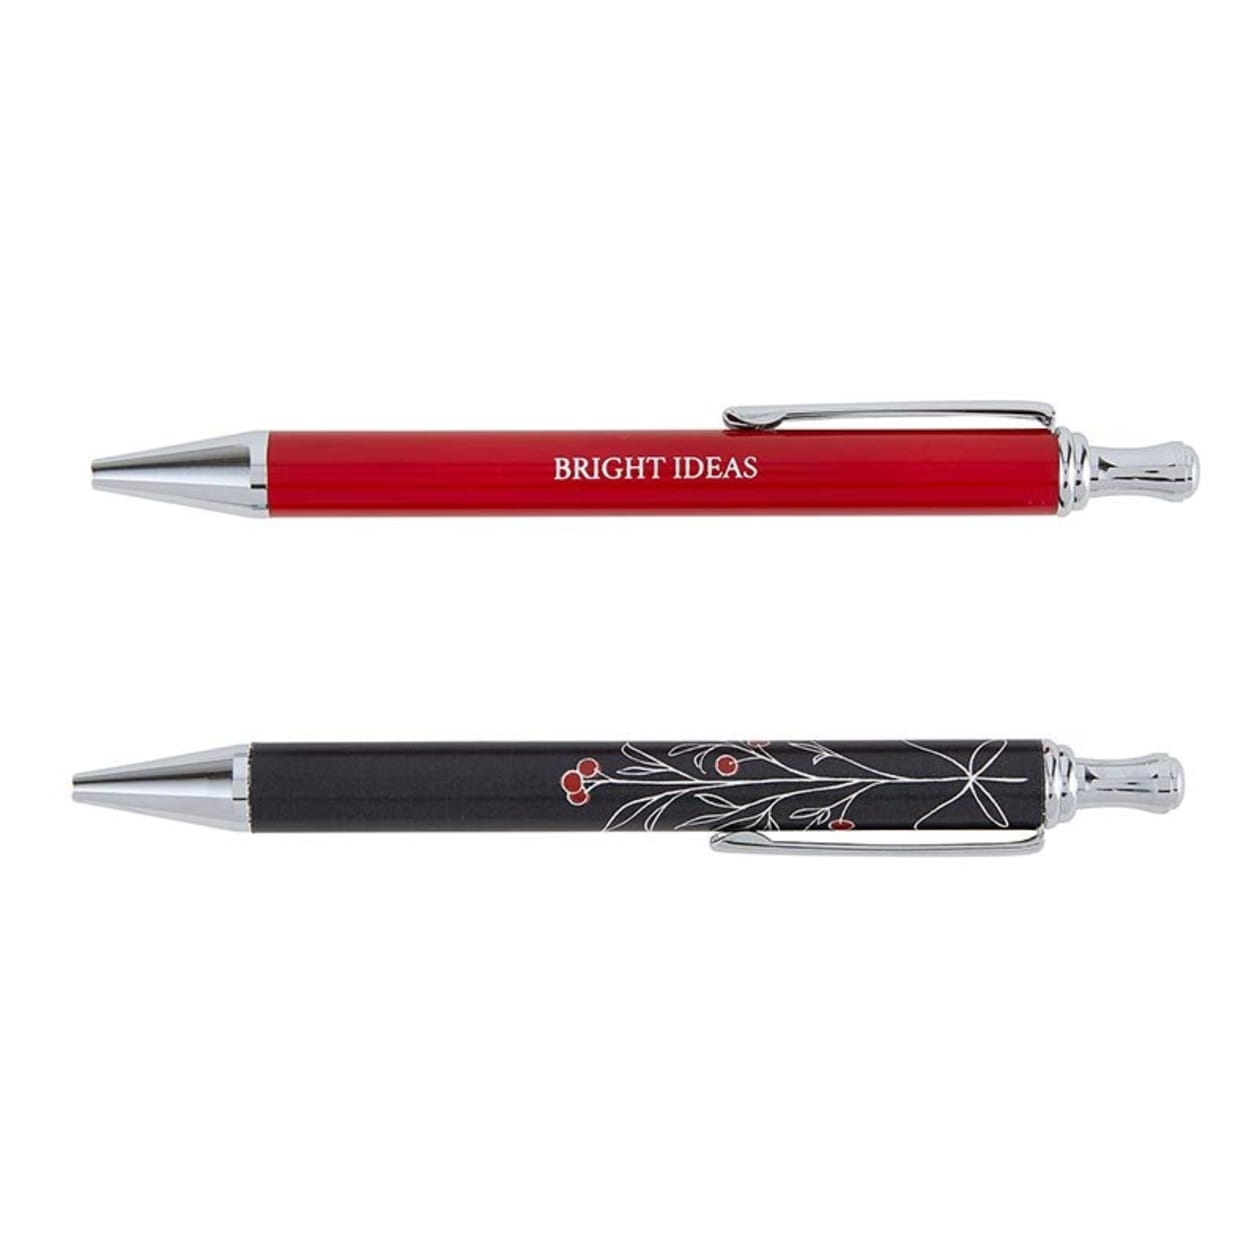 Bright Ideas Pen Set of 2 | Giftable Pens in Box | Refillable